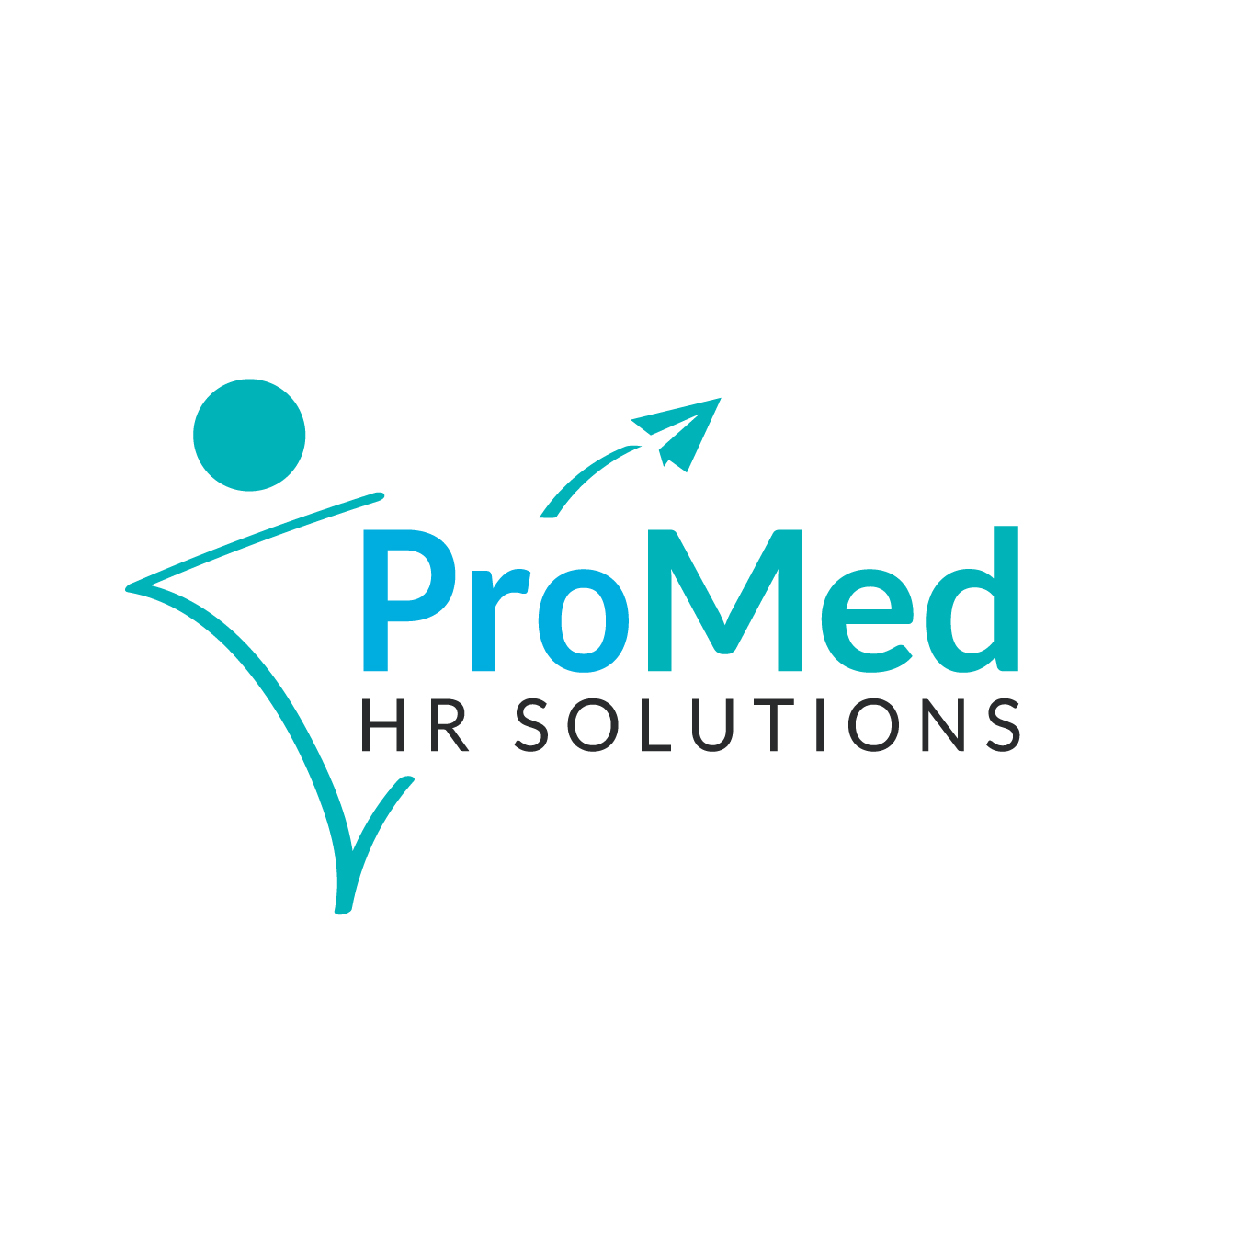 ProMed HR Solutions